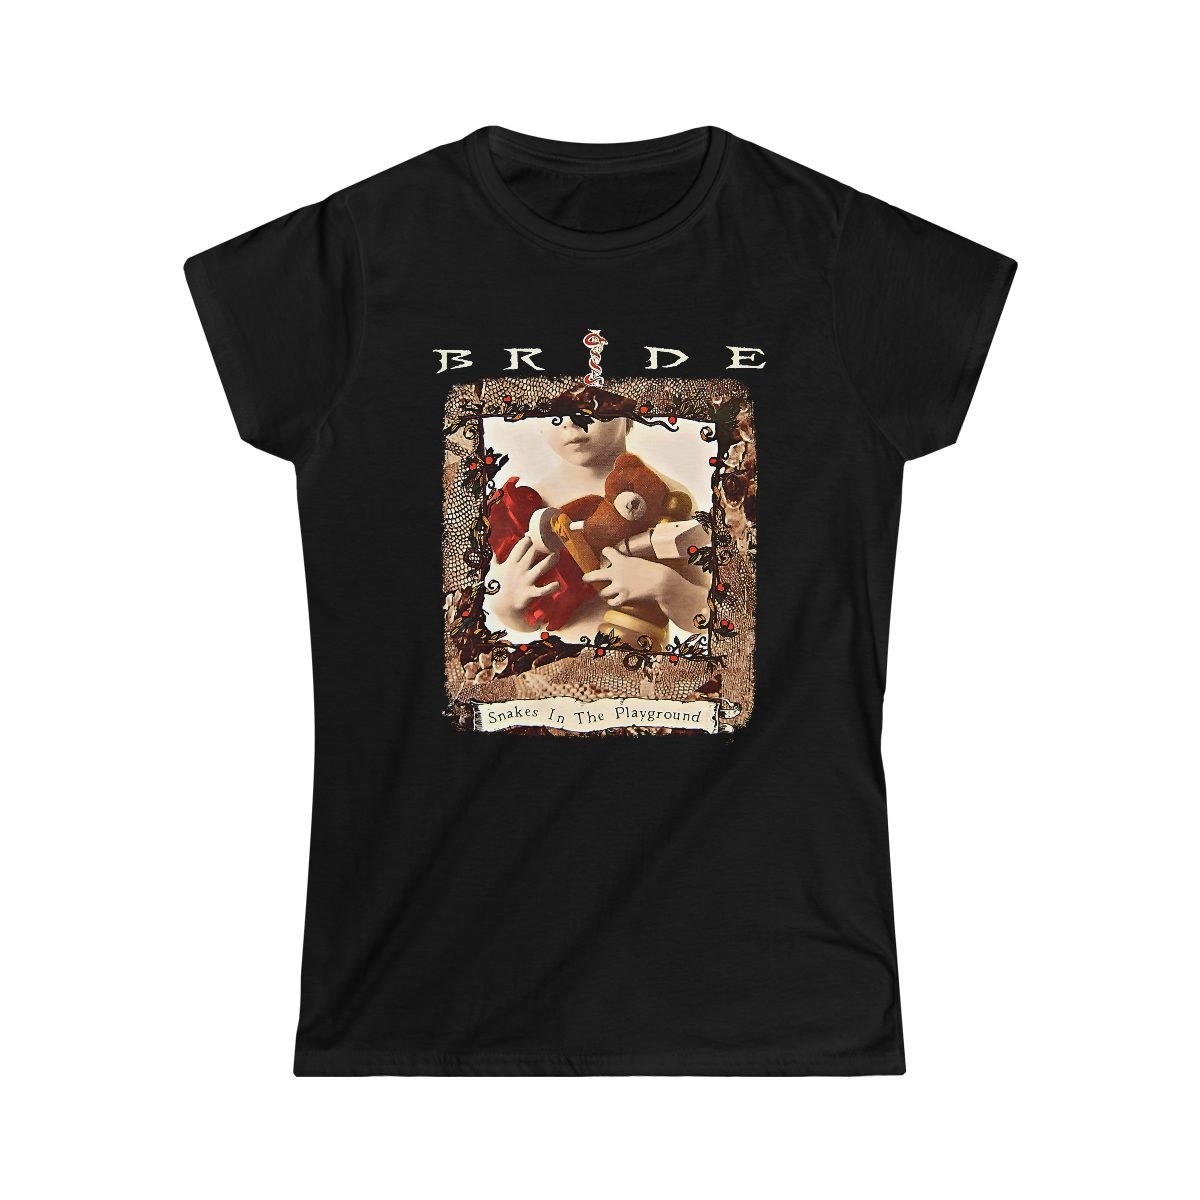 Bride – Snakes on The Playground Women’s Short Sleeve Tshirt 64000L